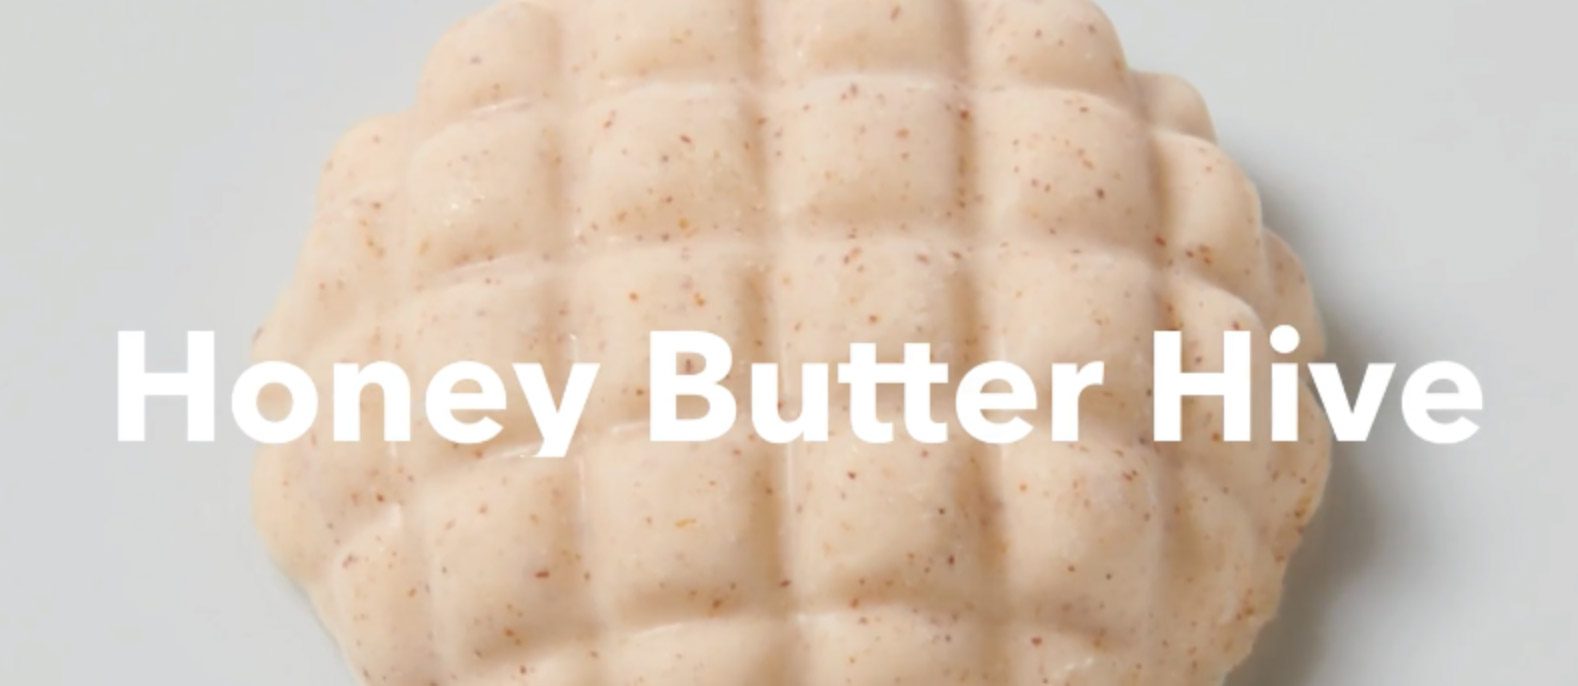 The new Honey Butter Hive combines its unique shape with the flavor of honey + cinnamon sugar.